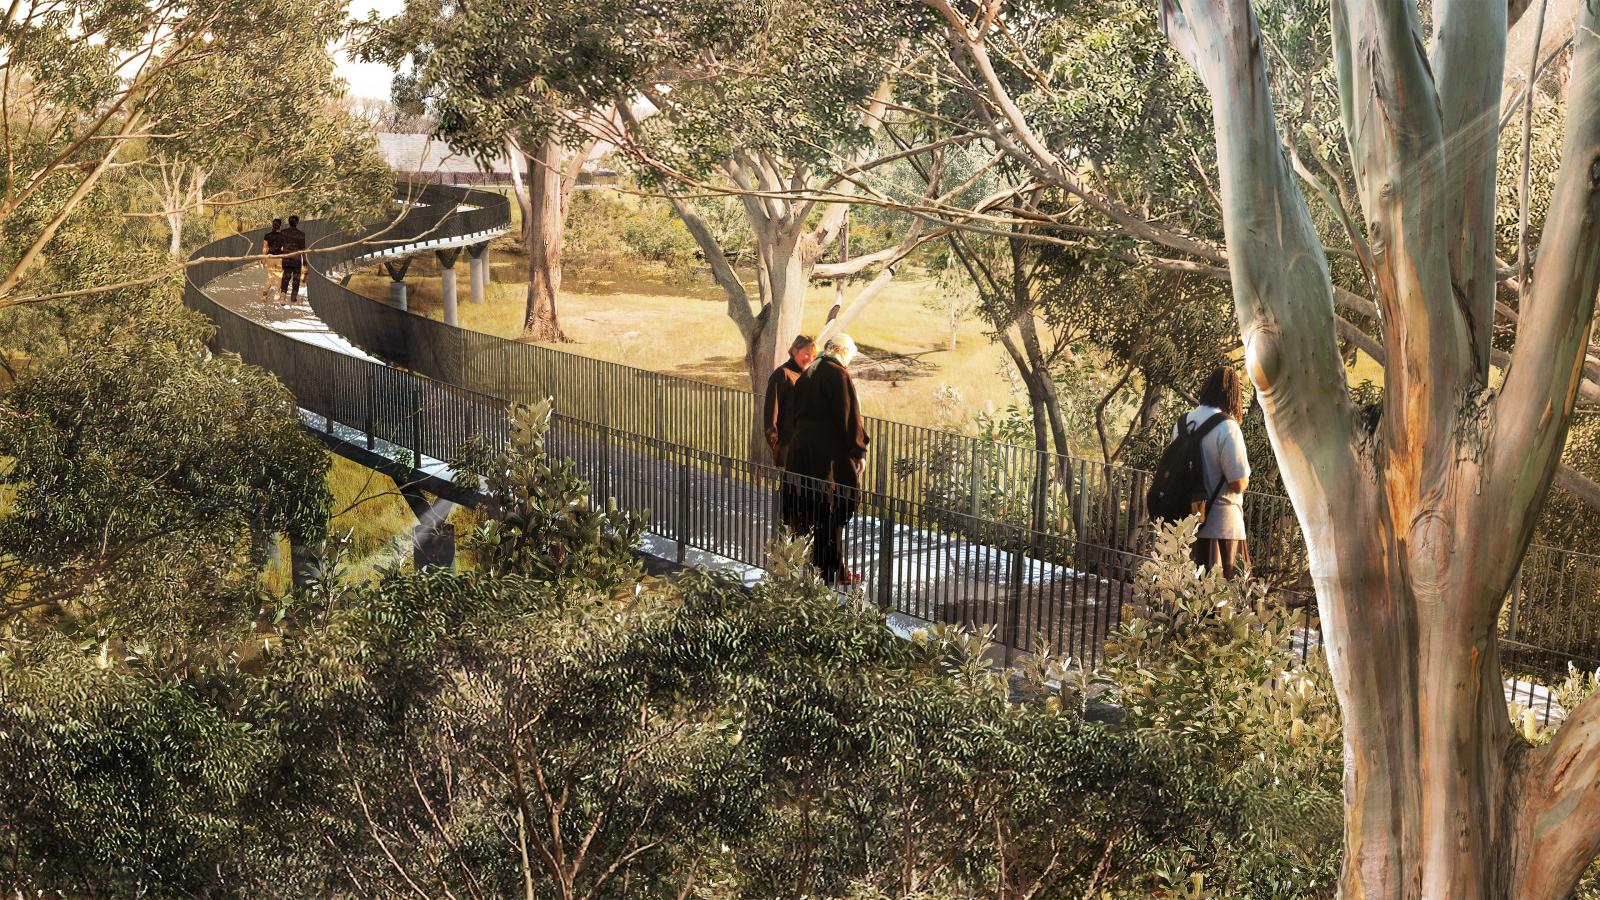 A winding elevated walkway weaves through a dense forest filled with tall trees and lush green foliage. Several people are walking along the pathway, enjoying the natural surroundings and scenic views in this serene sanctuary. The atmosphere looks tranquil and inviting.